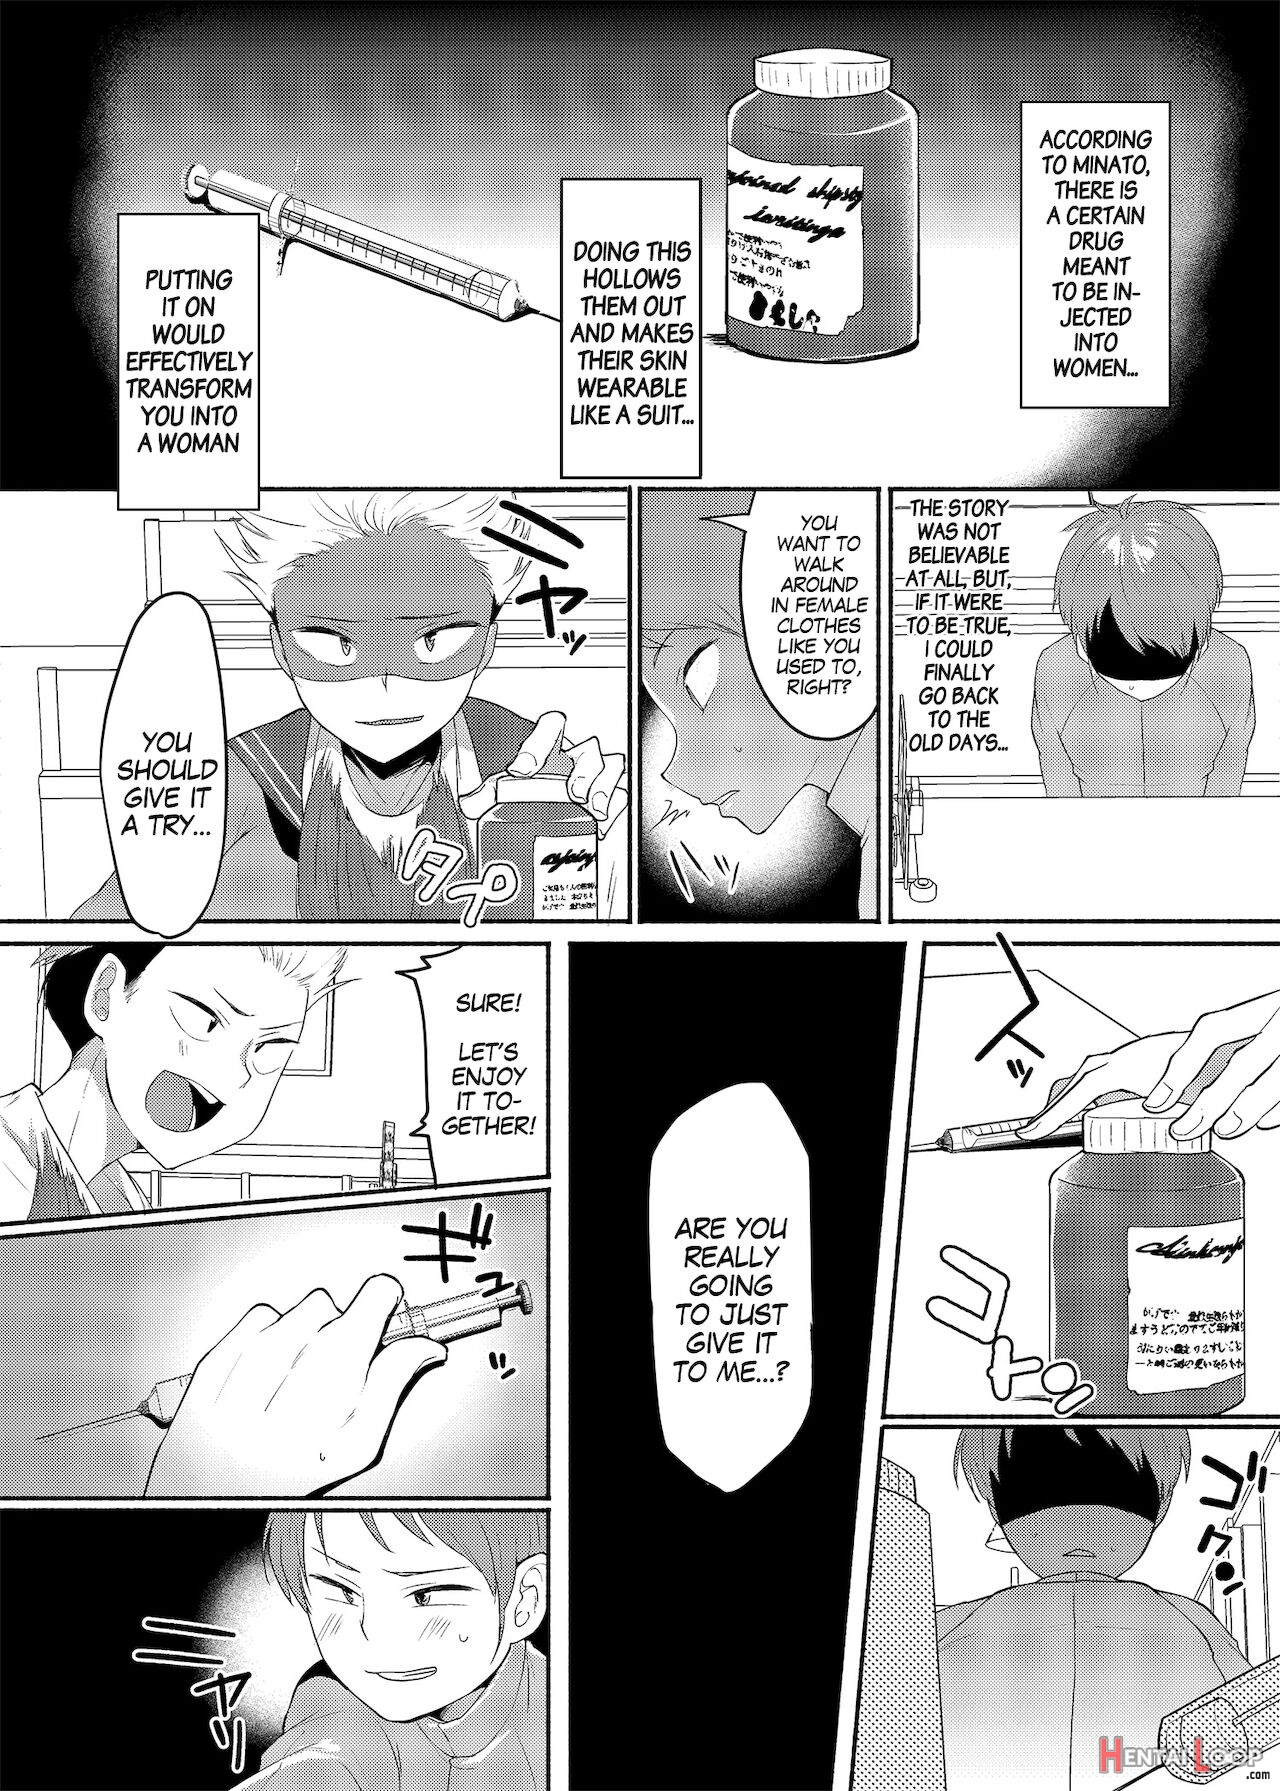 Crossdressing Fetish Gone Out Of Hand page 6